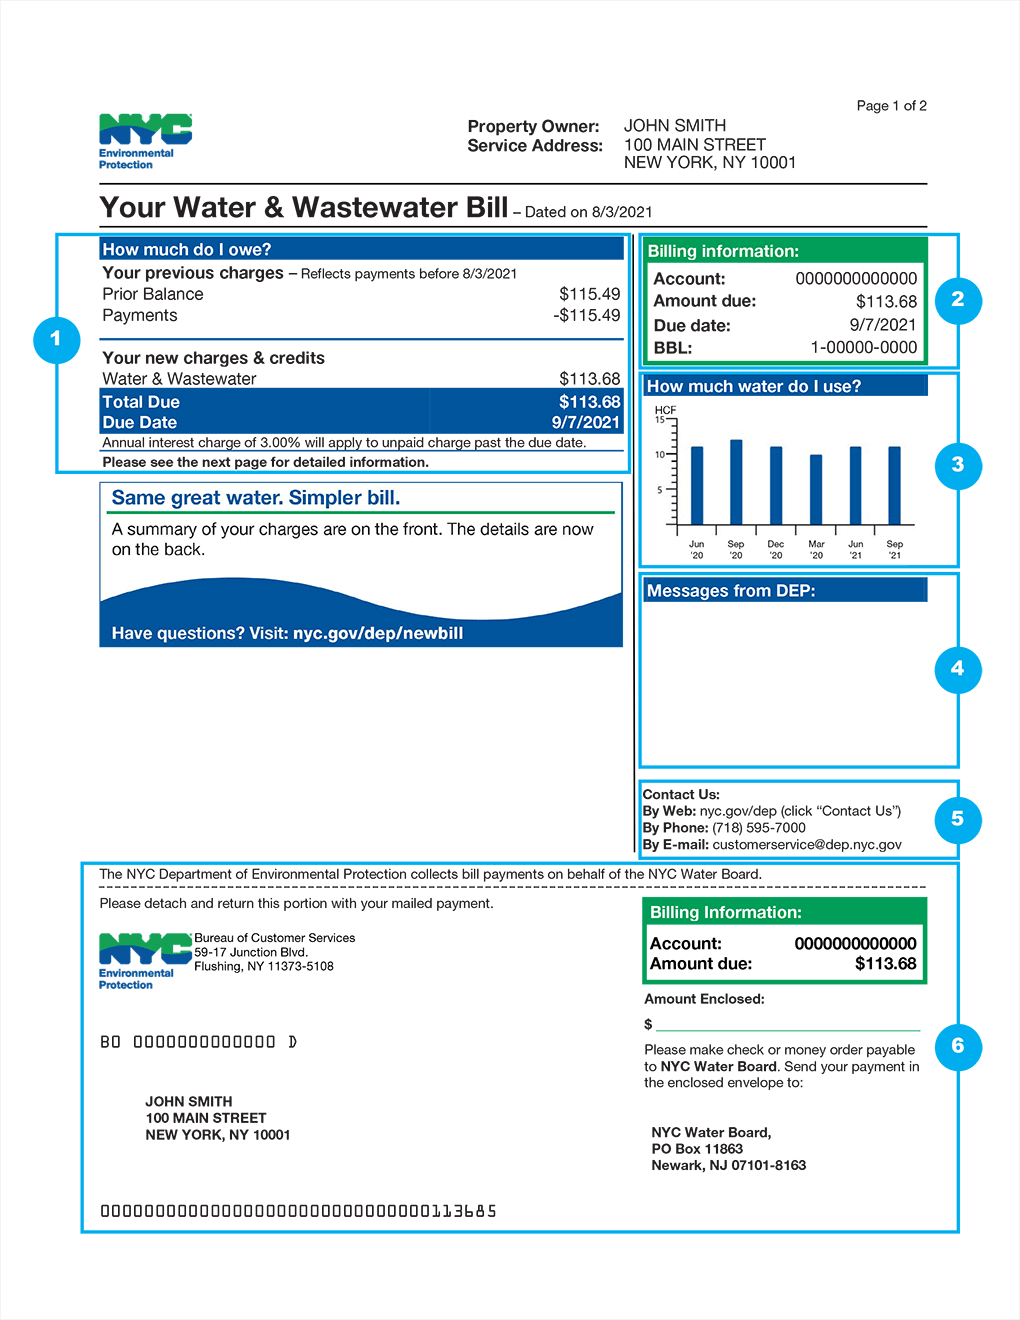 Page 1 of sample bill with Billing Summary, Billing Information, Water Use, Message Center, Contact Us, and Payment Slip highlighted.